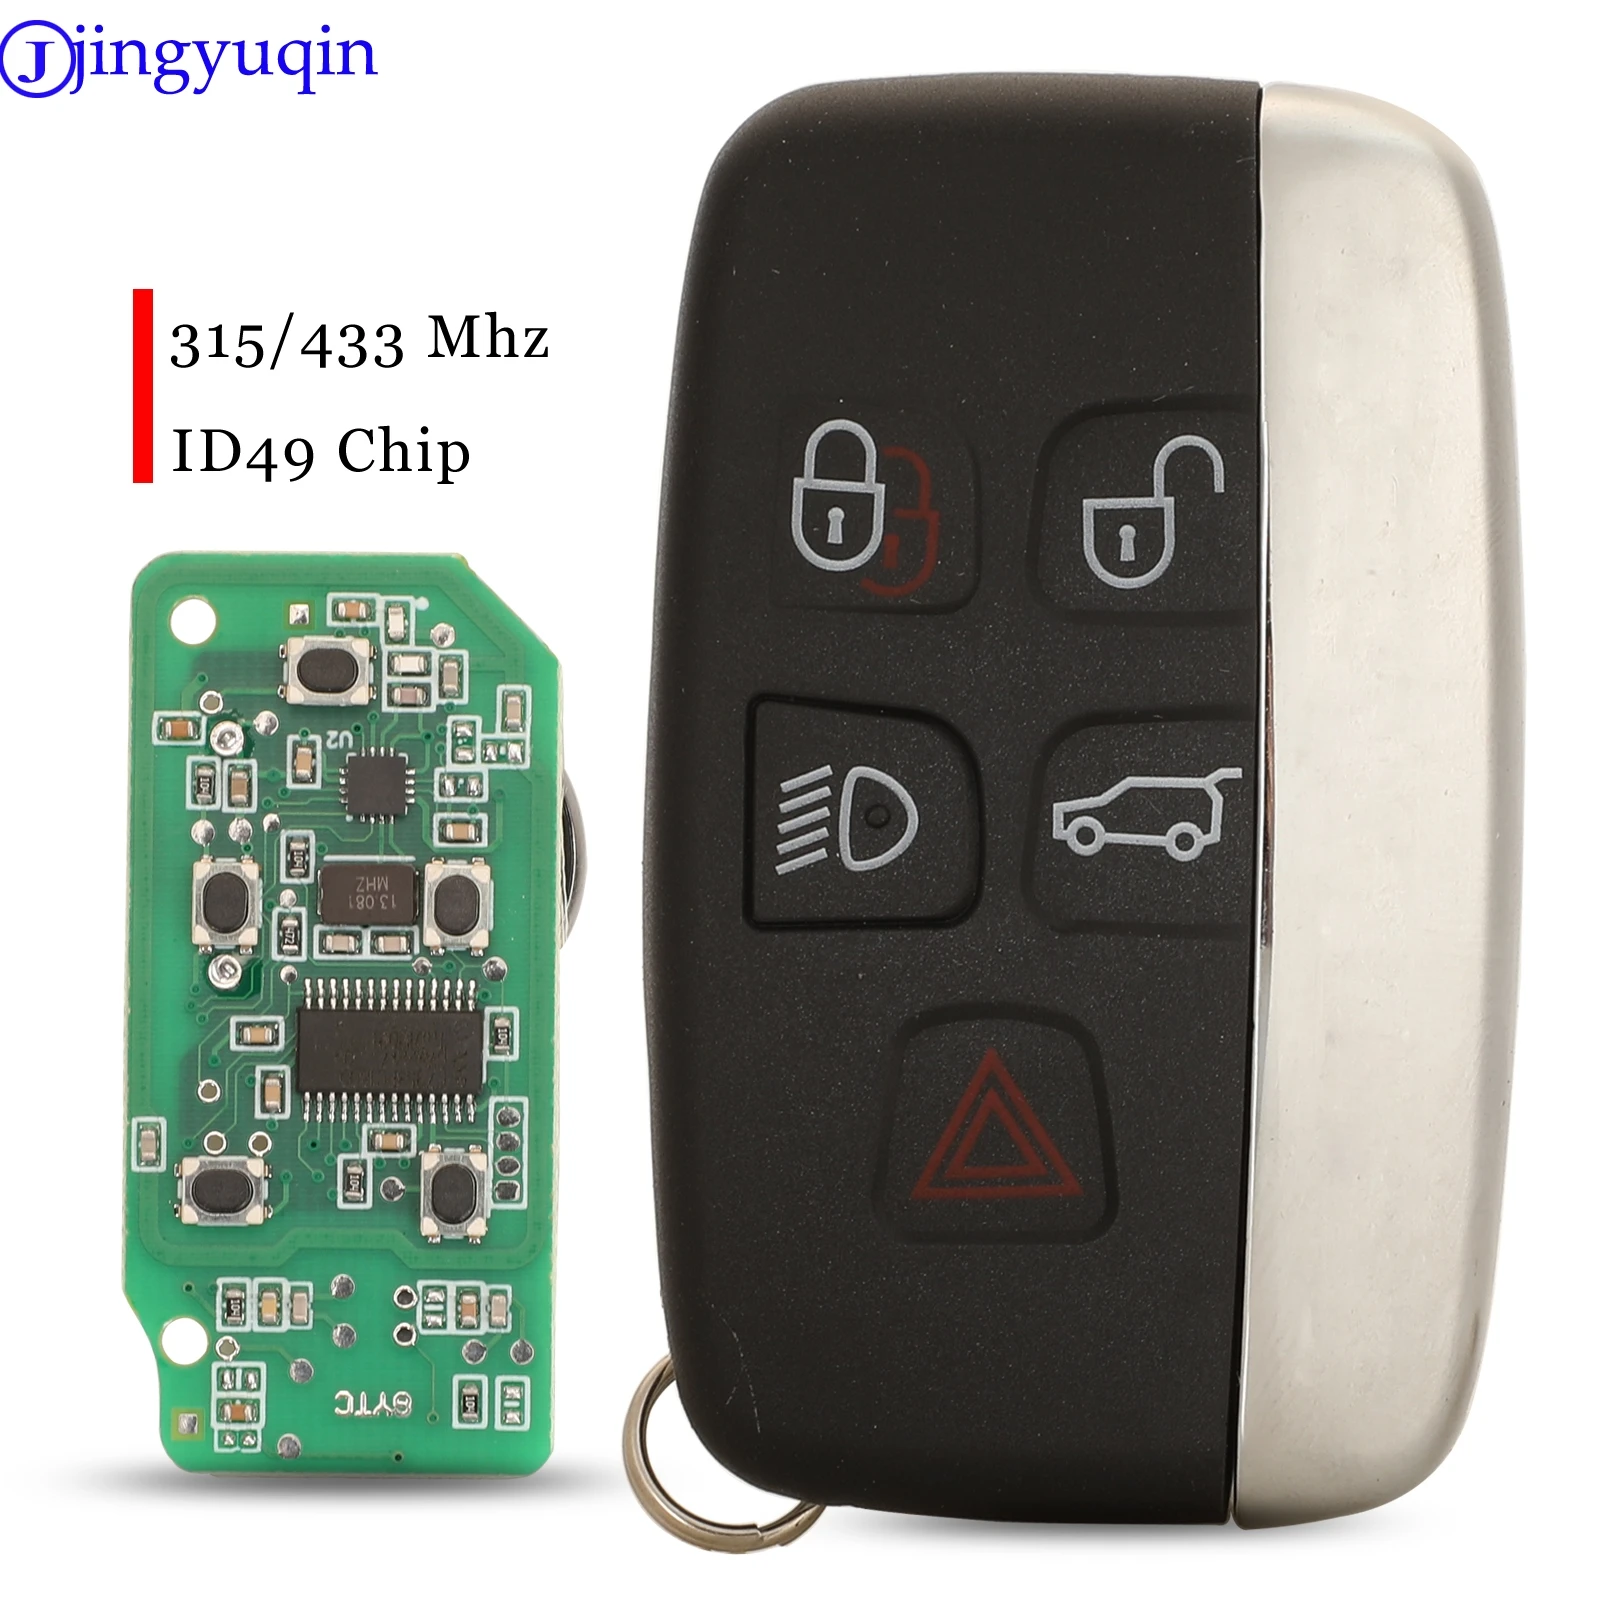 Jingyuqin 5 Buttons Flip Car Key Remote Fob 315/433Mhz ID49 Chip For Land Rover Range Rover Range Rover Evoque LR2 LR4